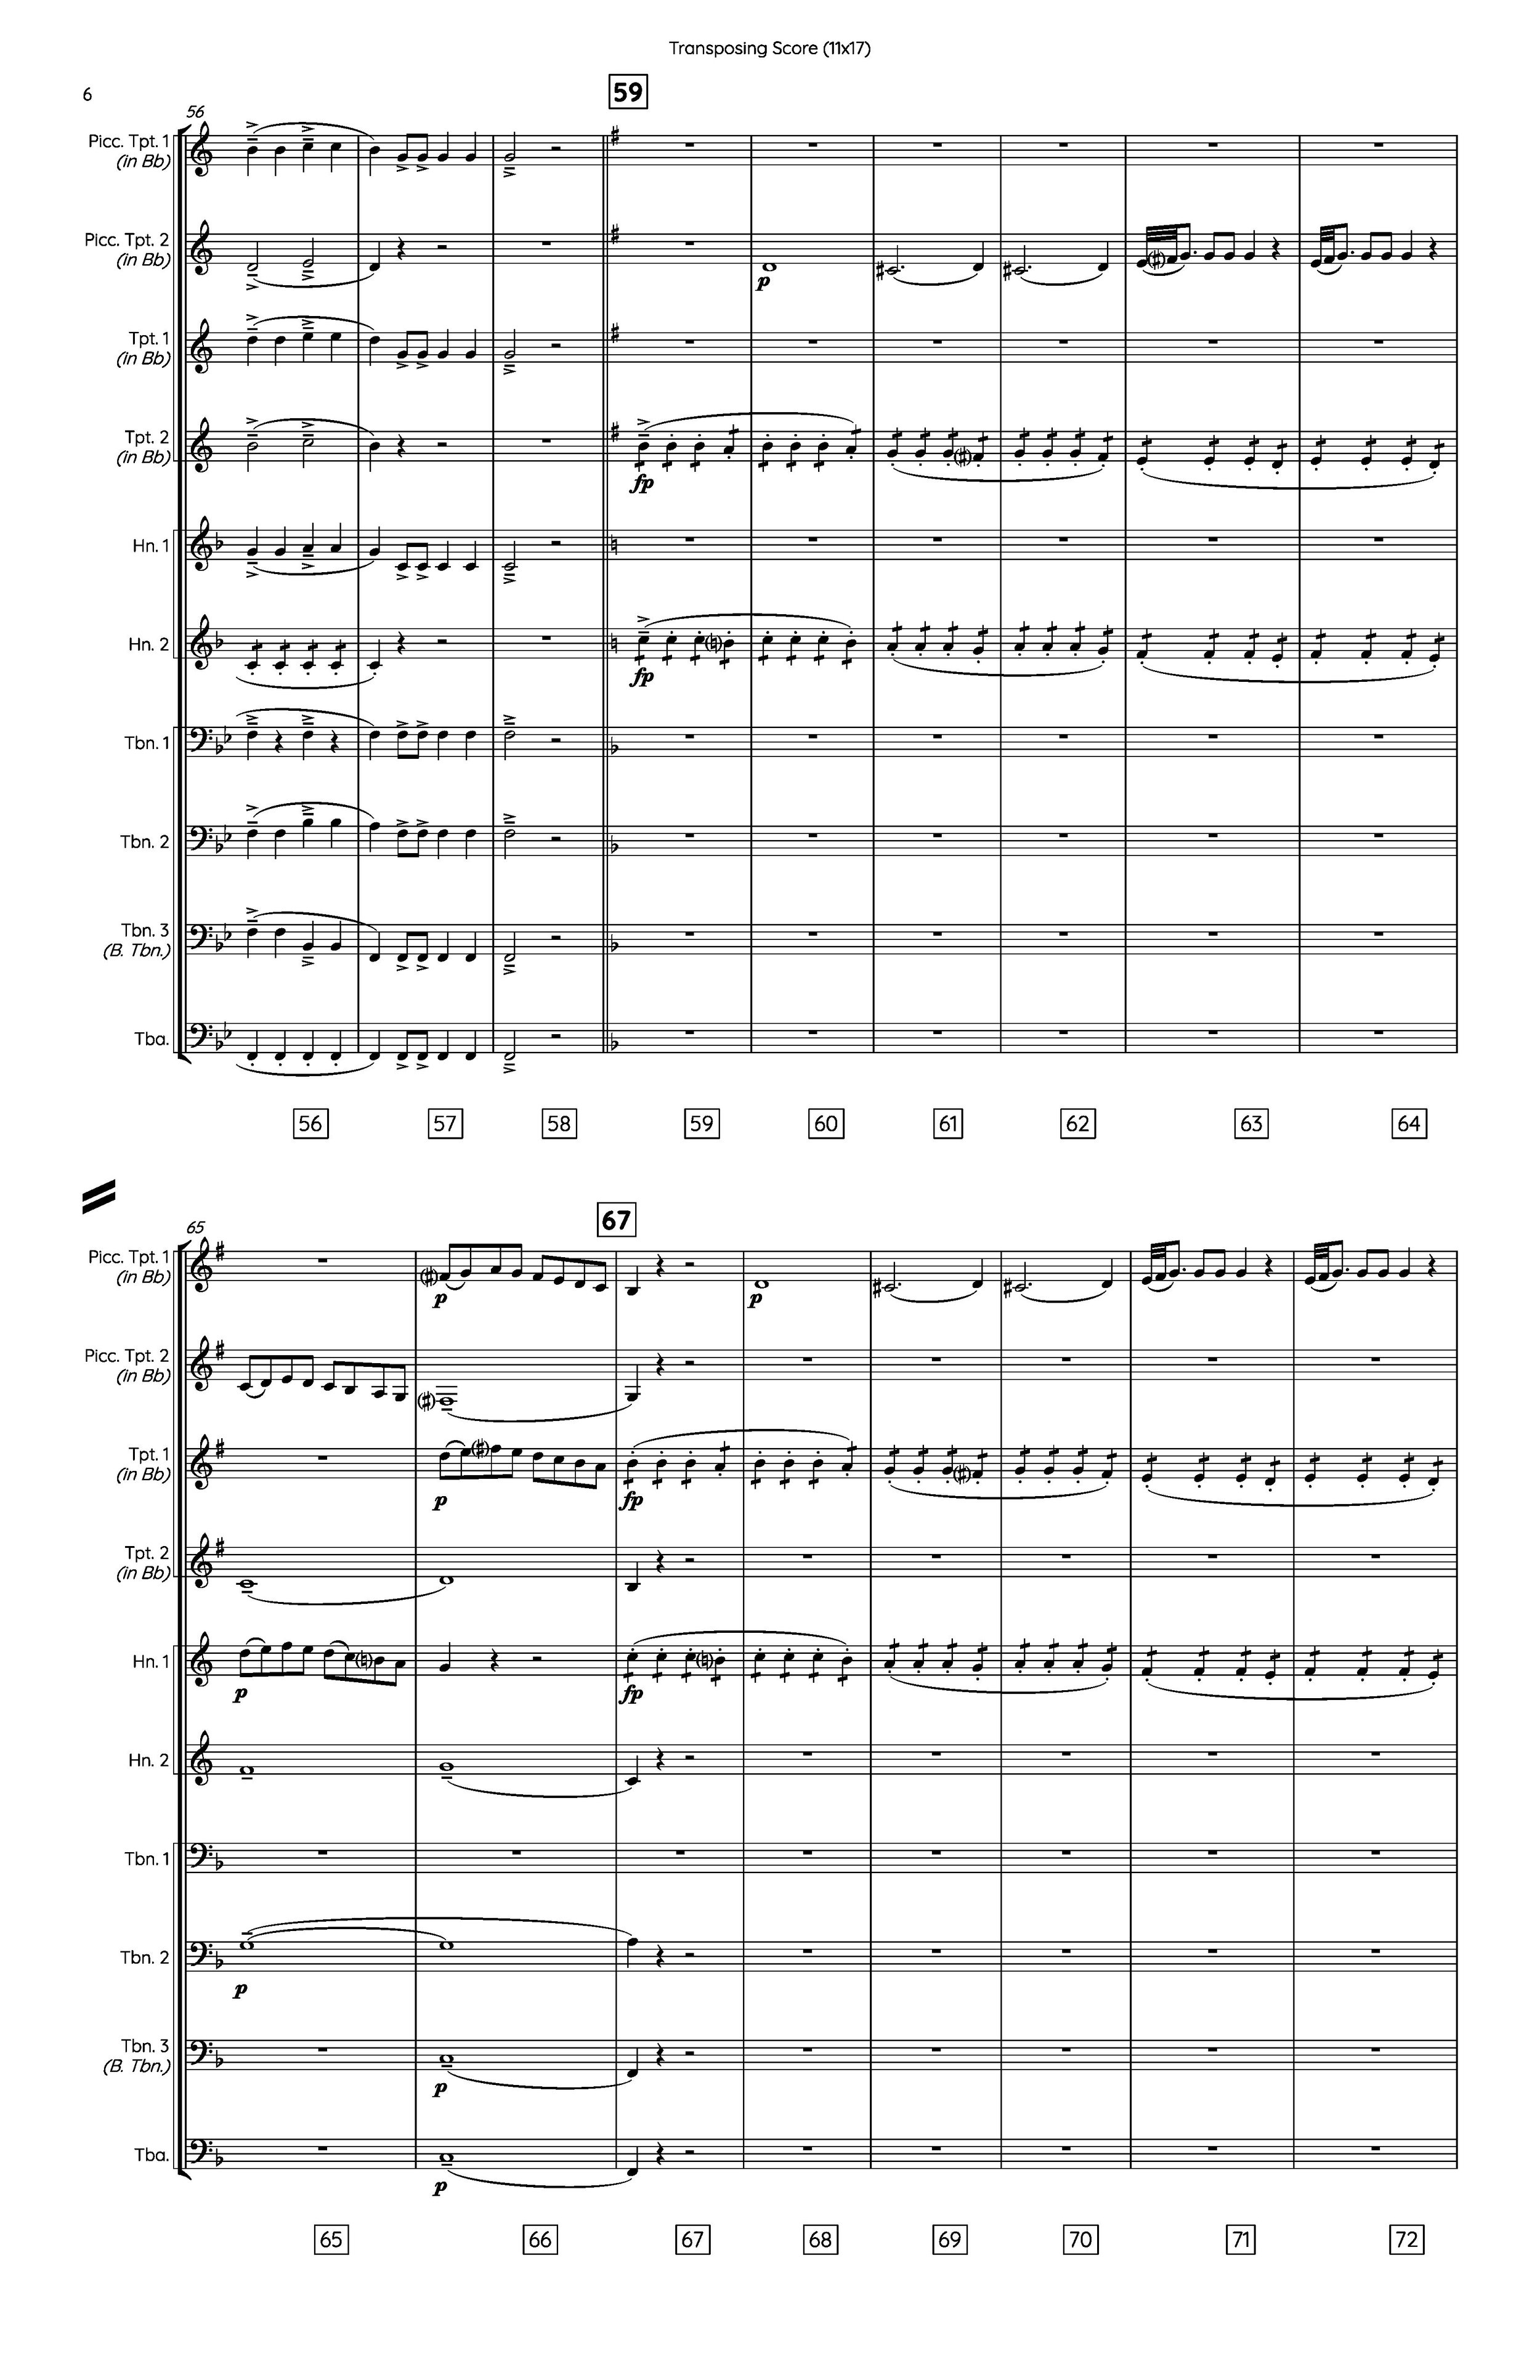 Marriage of Figaro [Brass Ensemble] in Bb - Score 11x17_Page_06.jpg